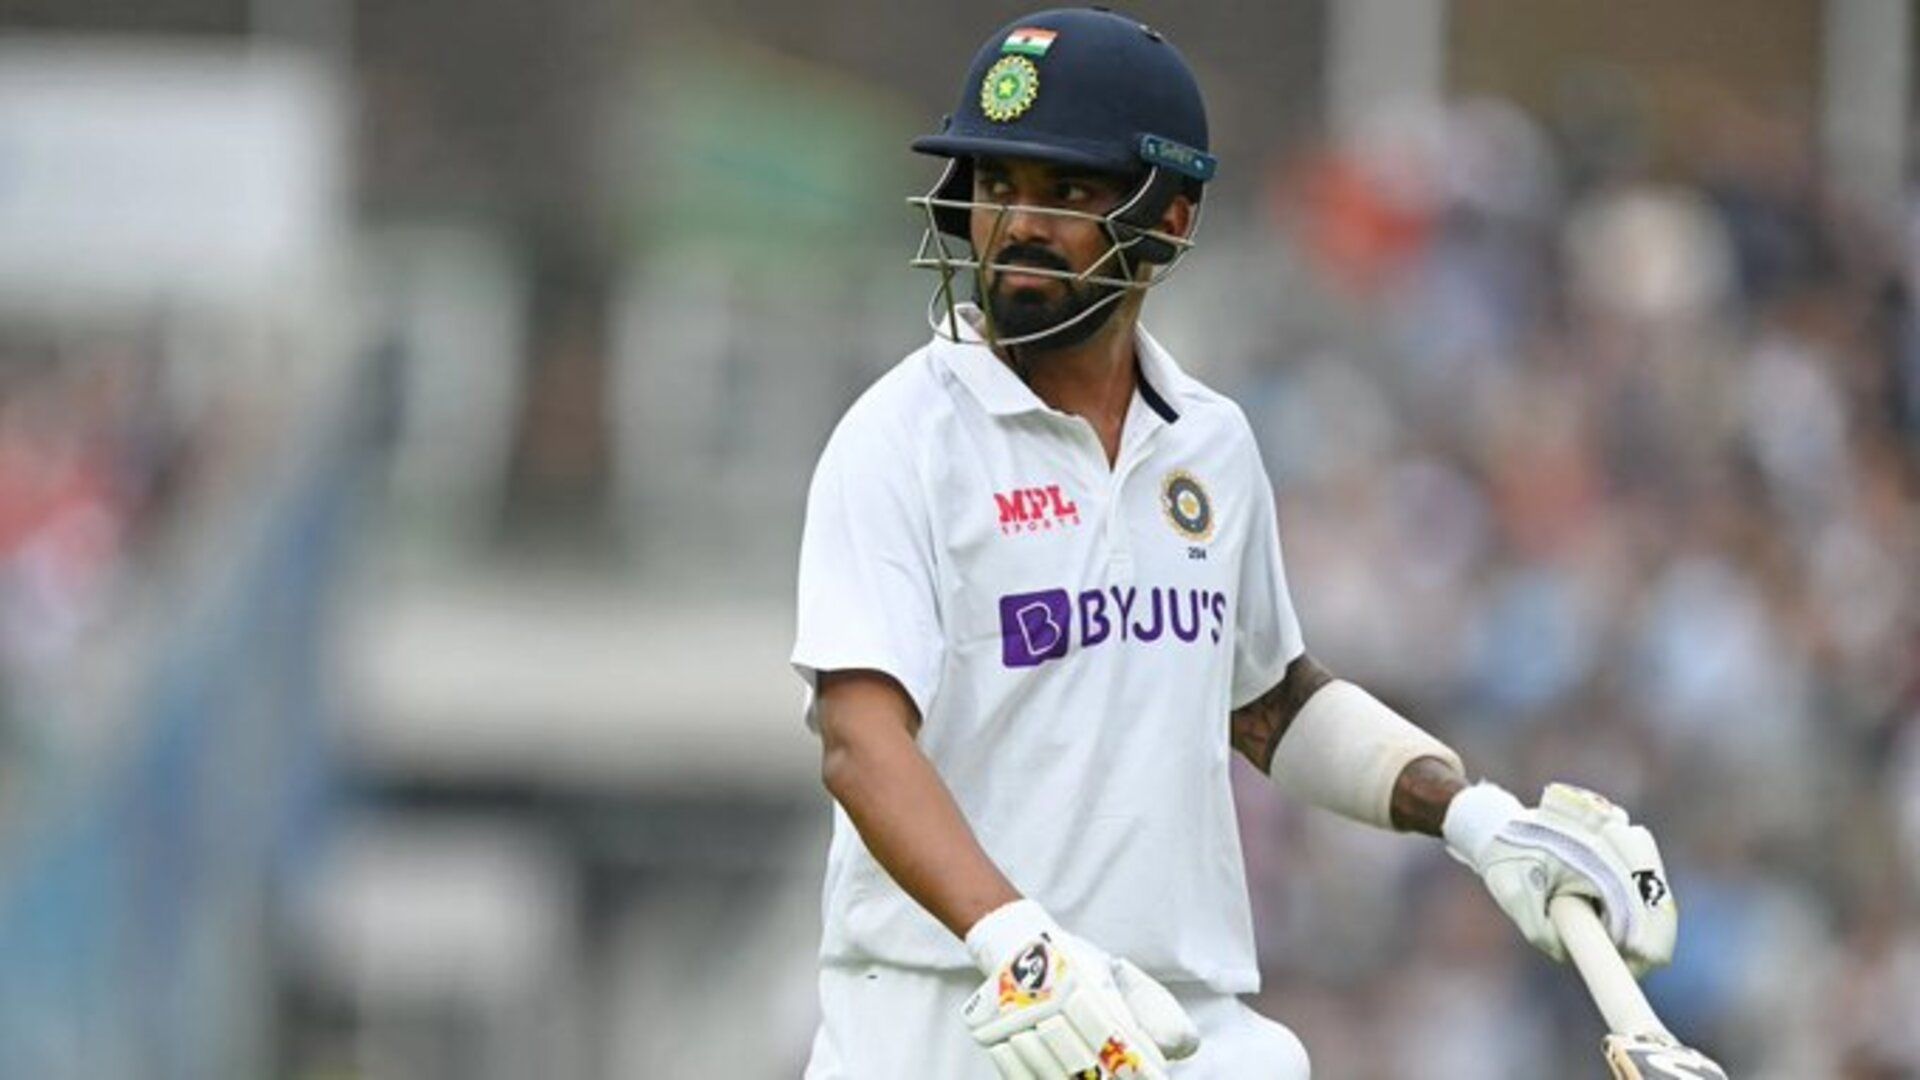 KL Rahul scored 45 runs in two innings against Bangladesh in Chattogram Test.